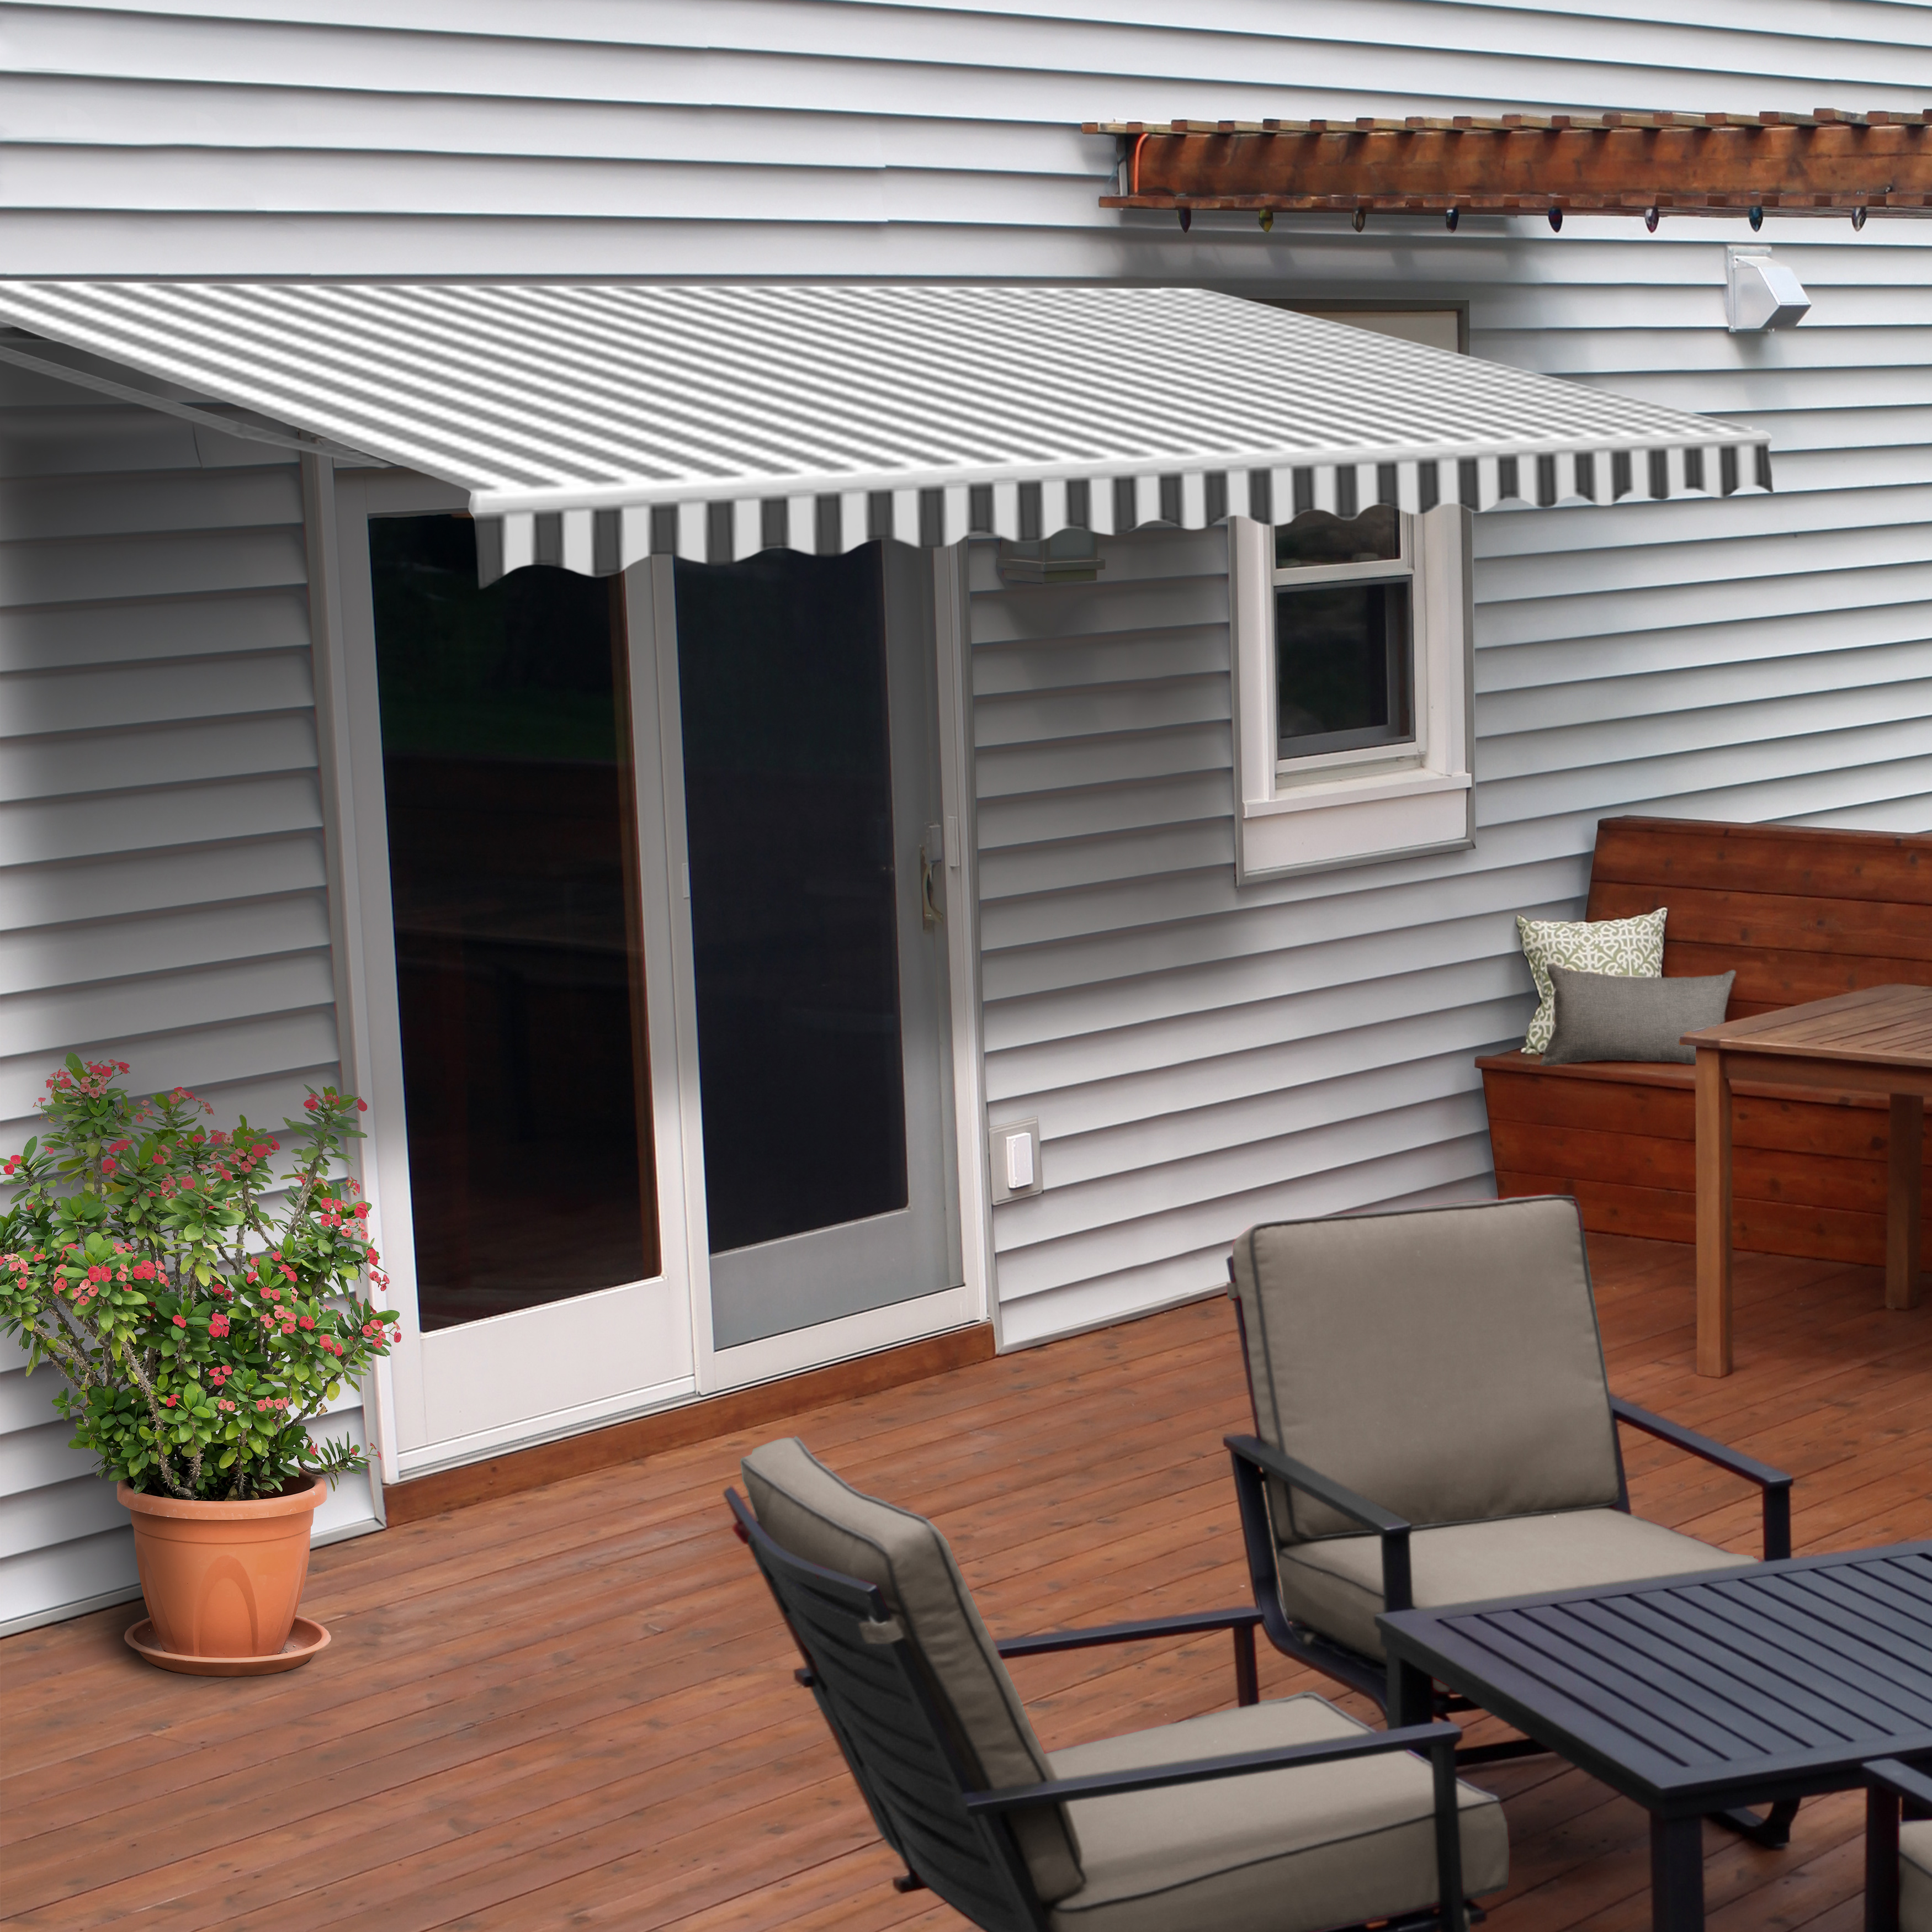 ALEKO 12' x 10' Retractable Patio Awning, Gray and White Striped Color - image 1 of 13